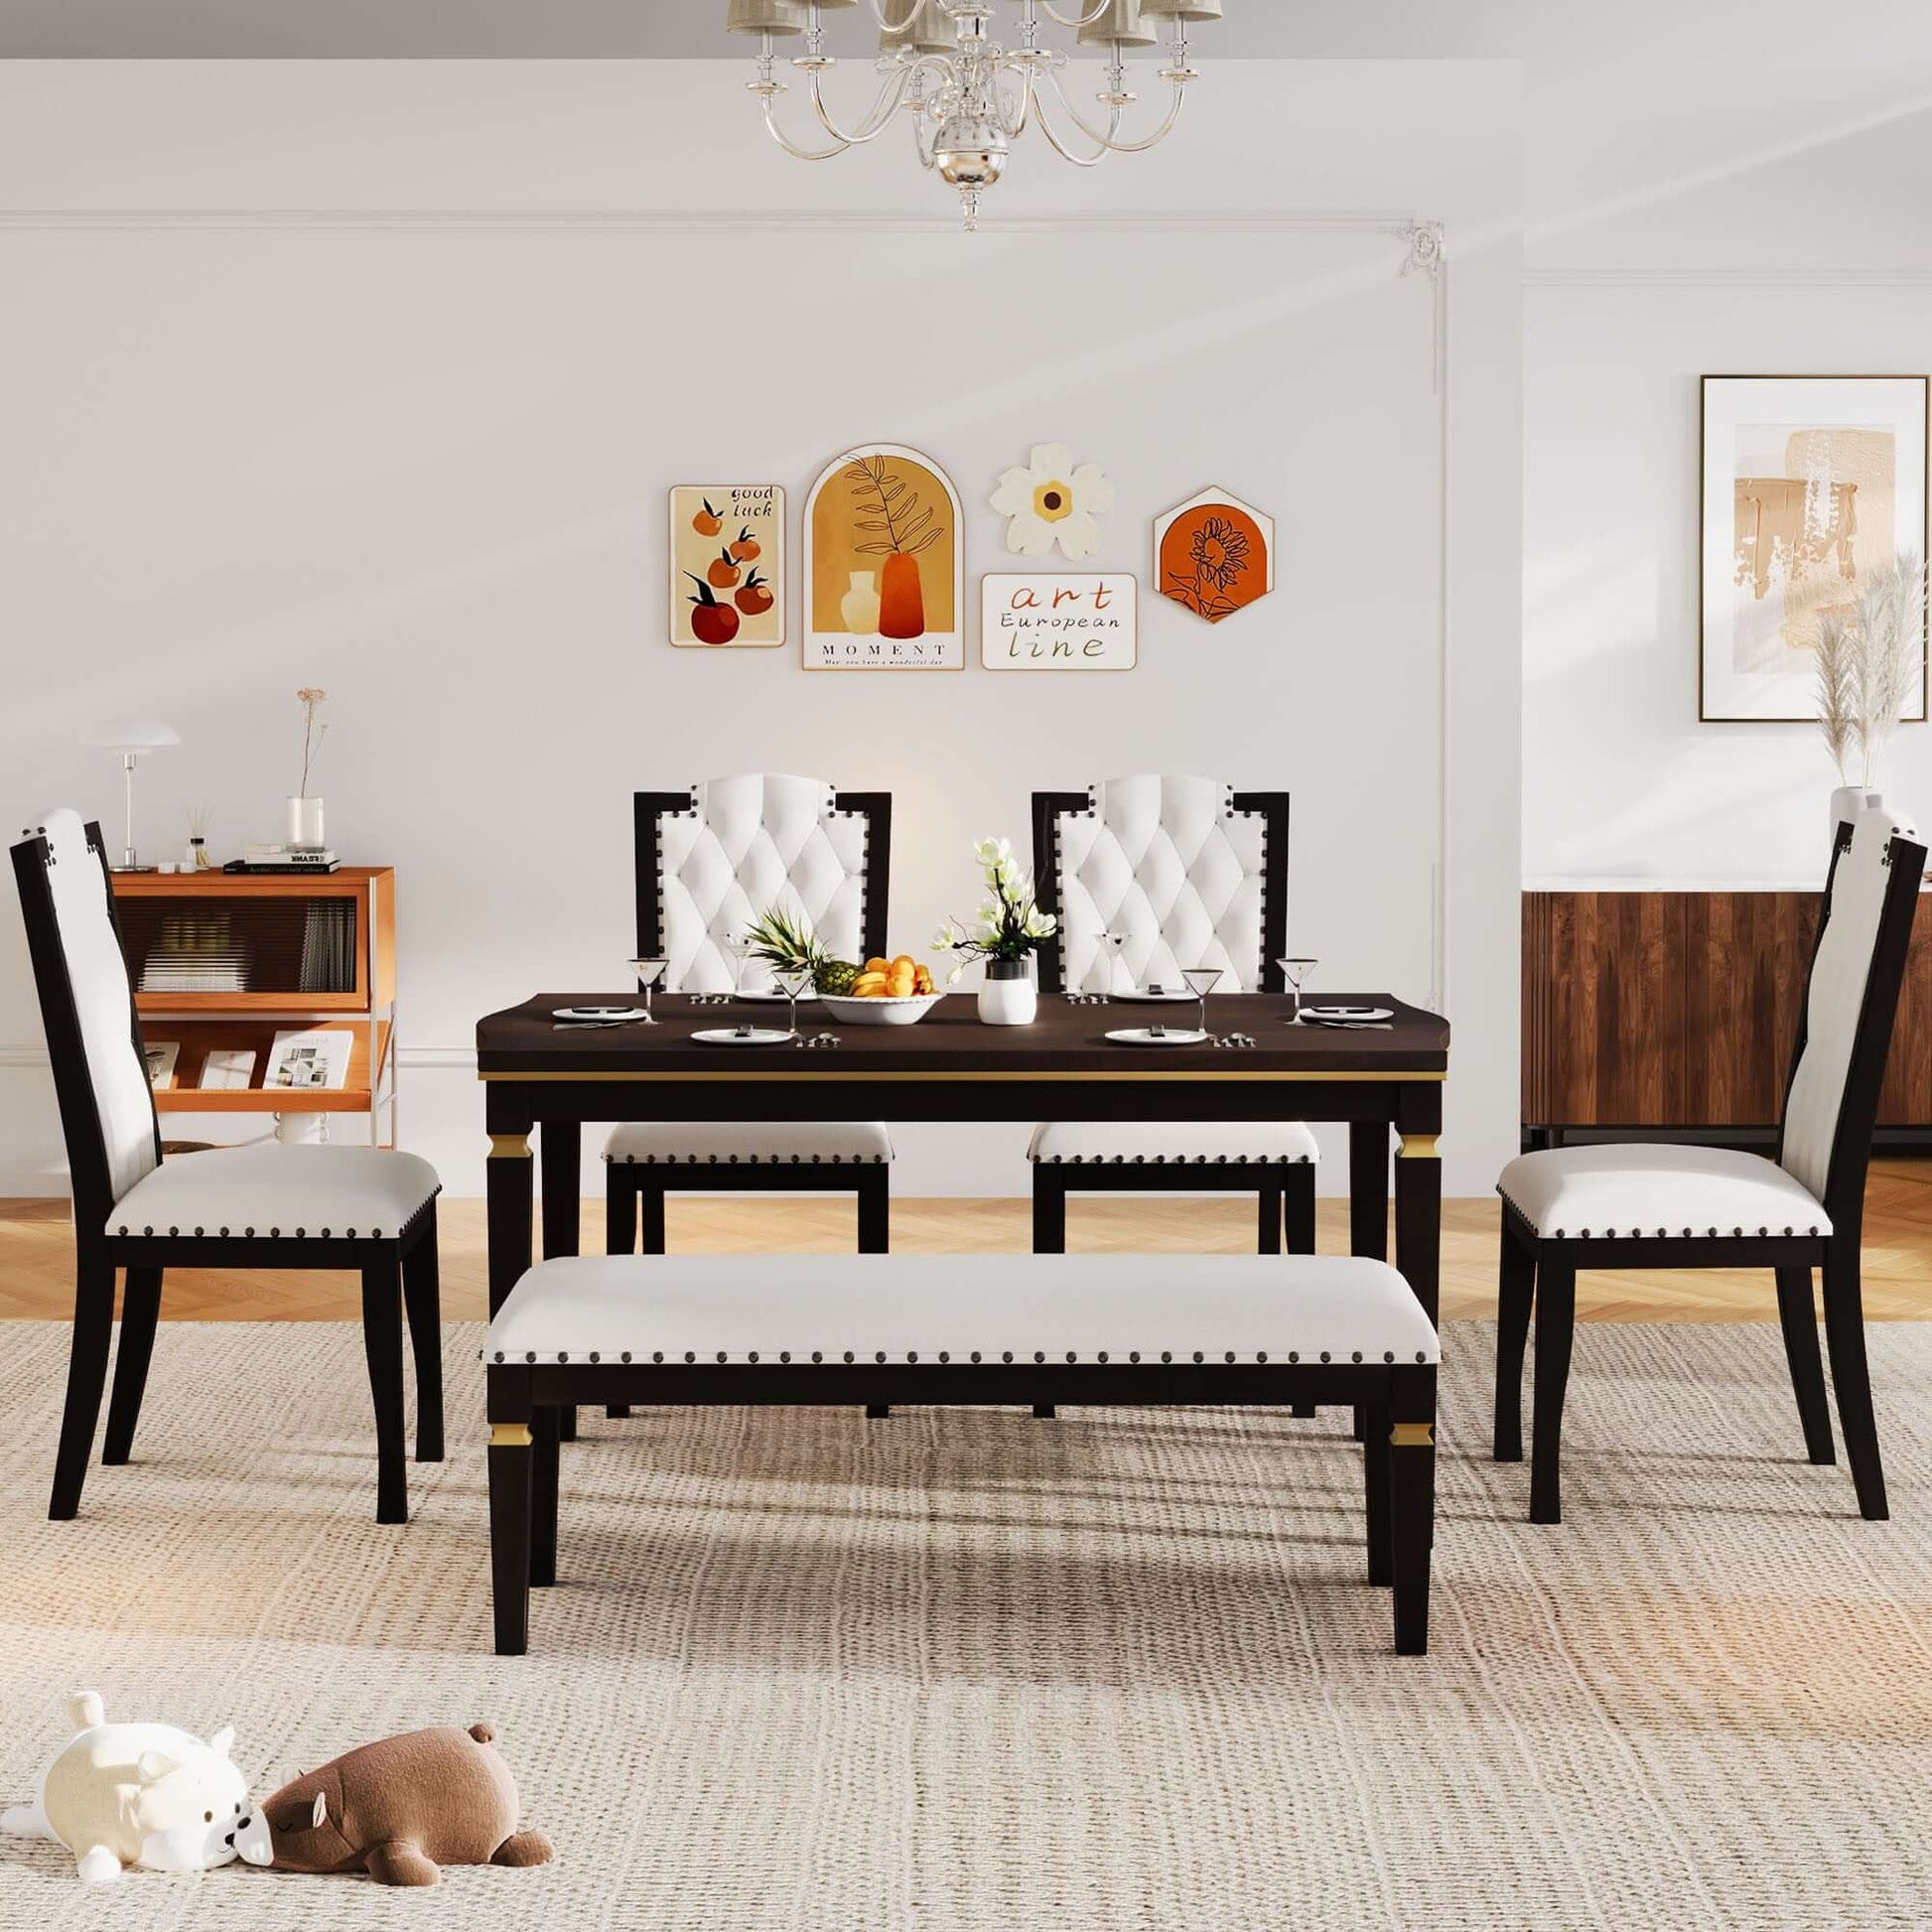 6-piece kitchen dining table set with espresso finish, 4 high-back tufted chairs, 1 bench, and 62.7" rectangular table in modern dining room